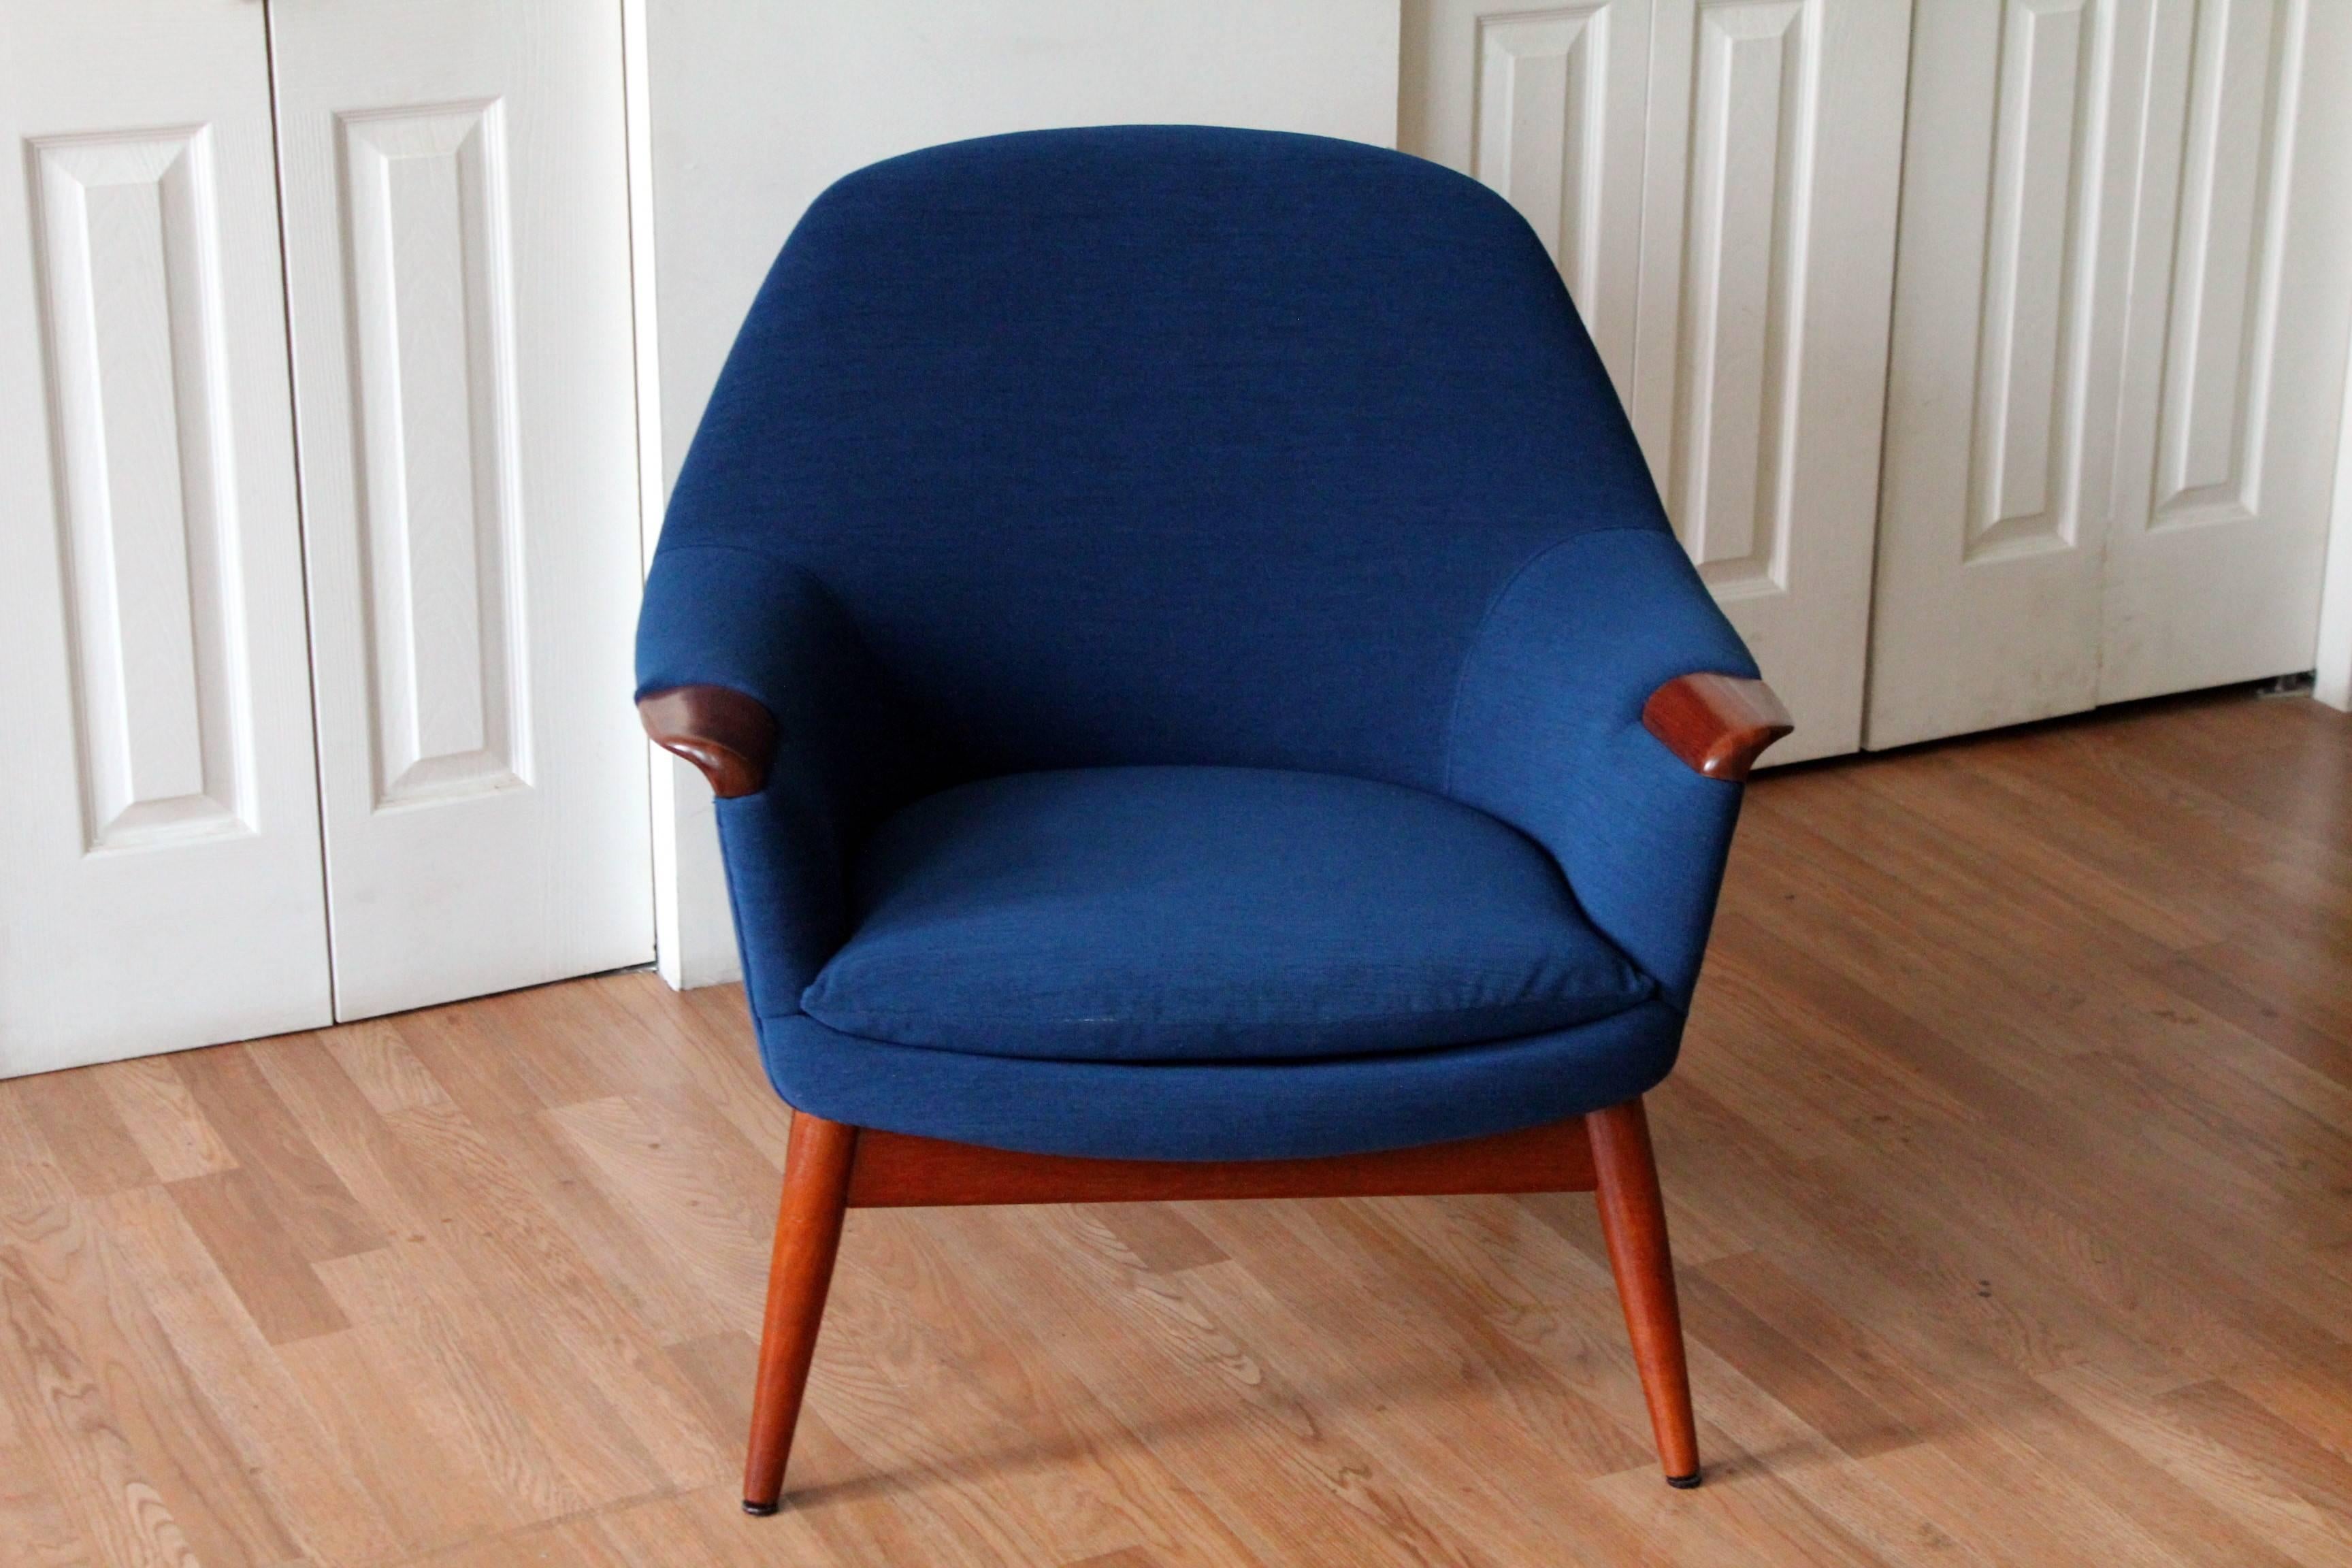 Gerhard Berg for LK Hjelle lounge chair newly upholstered in a rich, vivid blue Epingle (pronounced EP-PIN-GLAY). This scarce Norwegian Mid-Century Modern lounge chair is ready to grace your space! You must agree, this piece is beyond